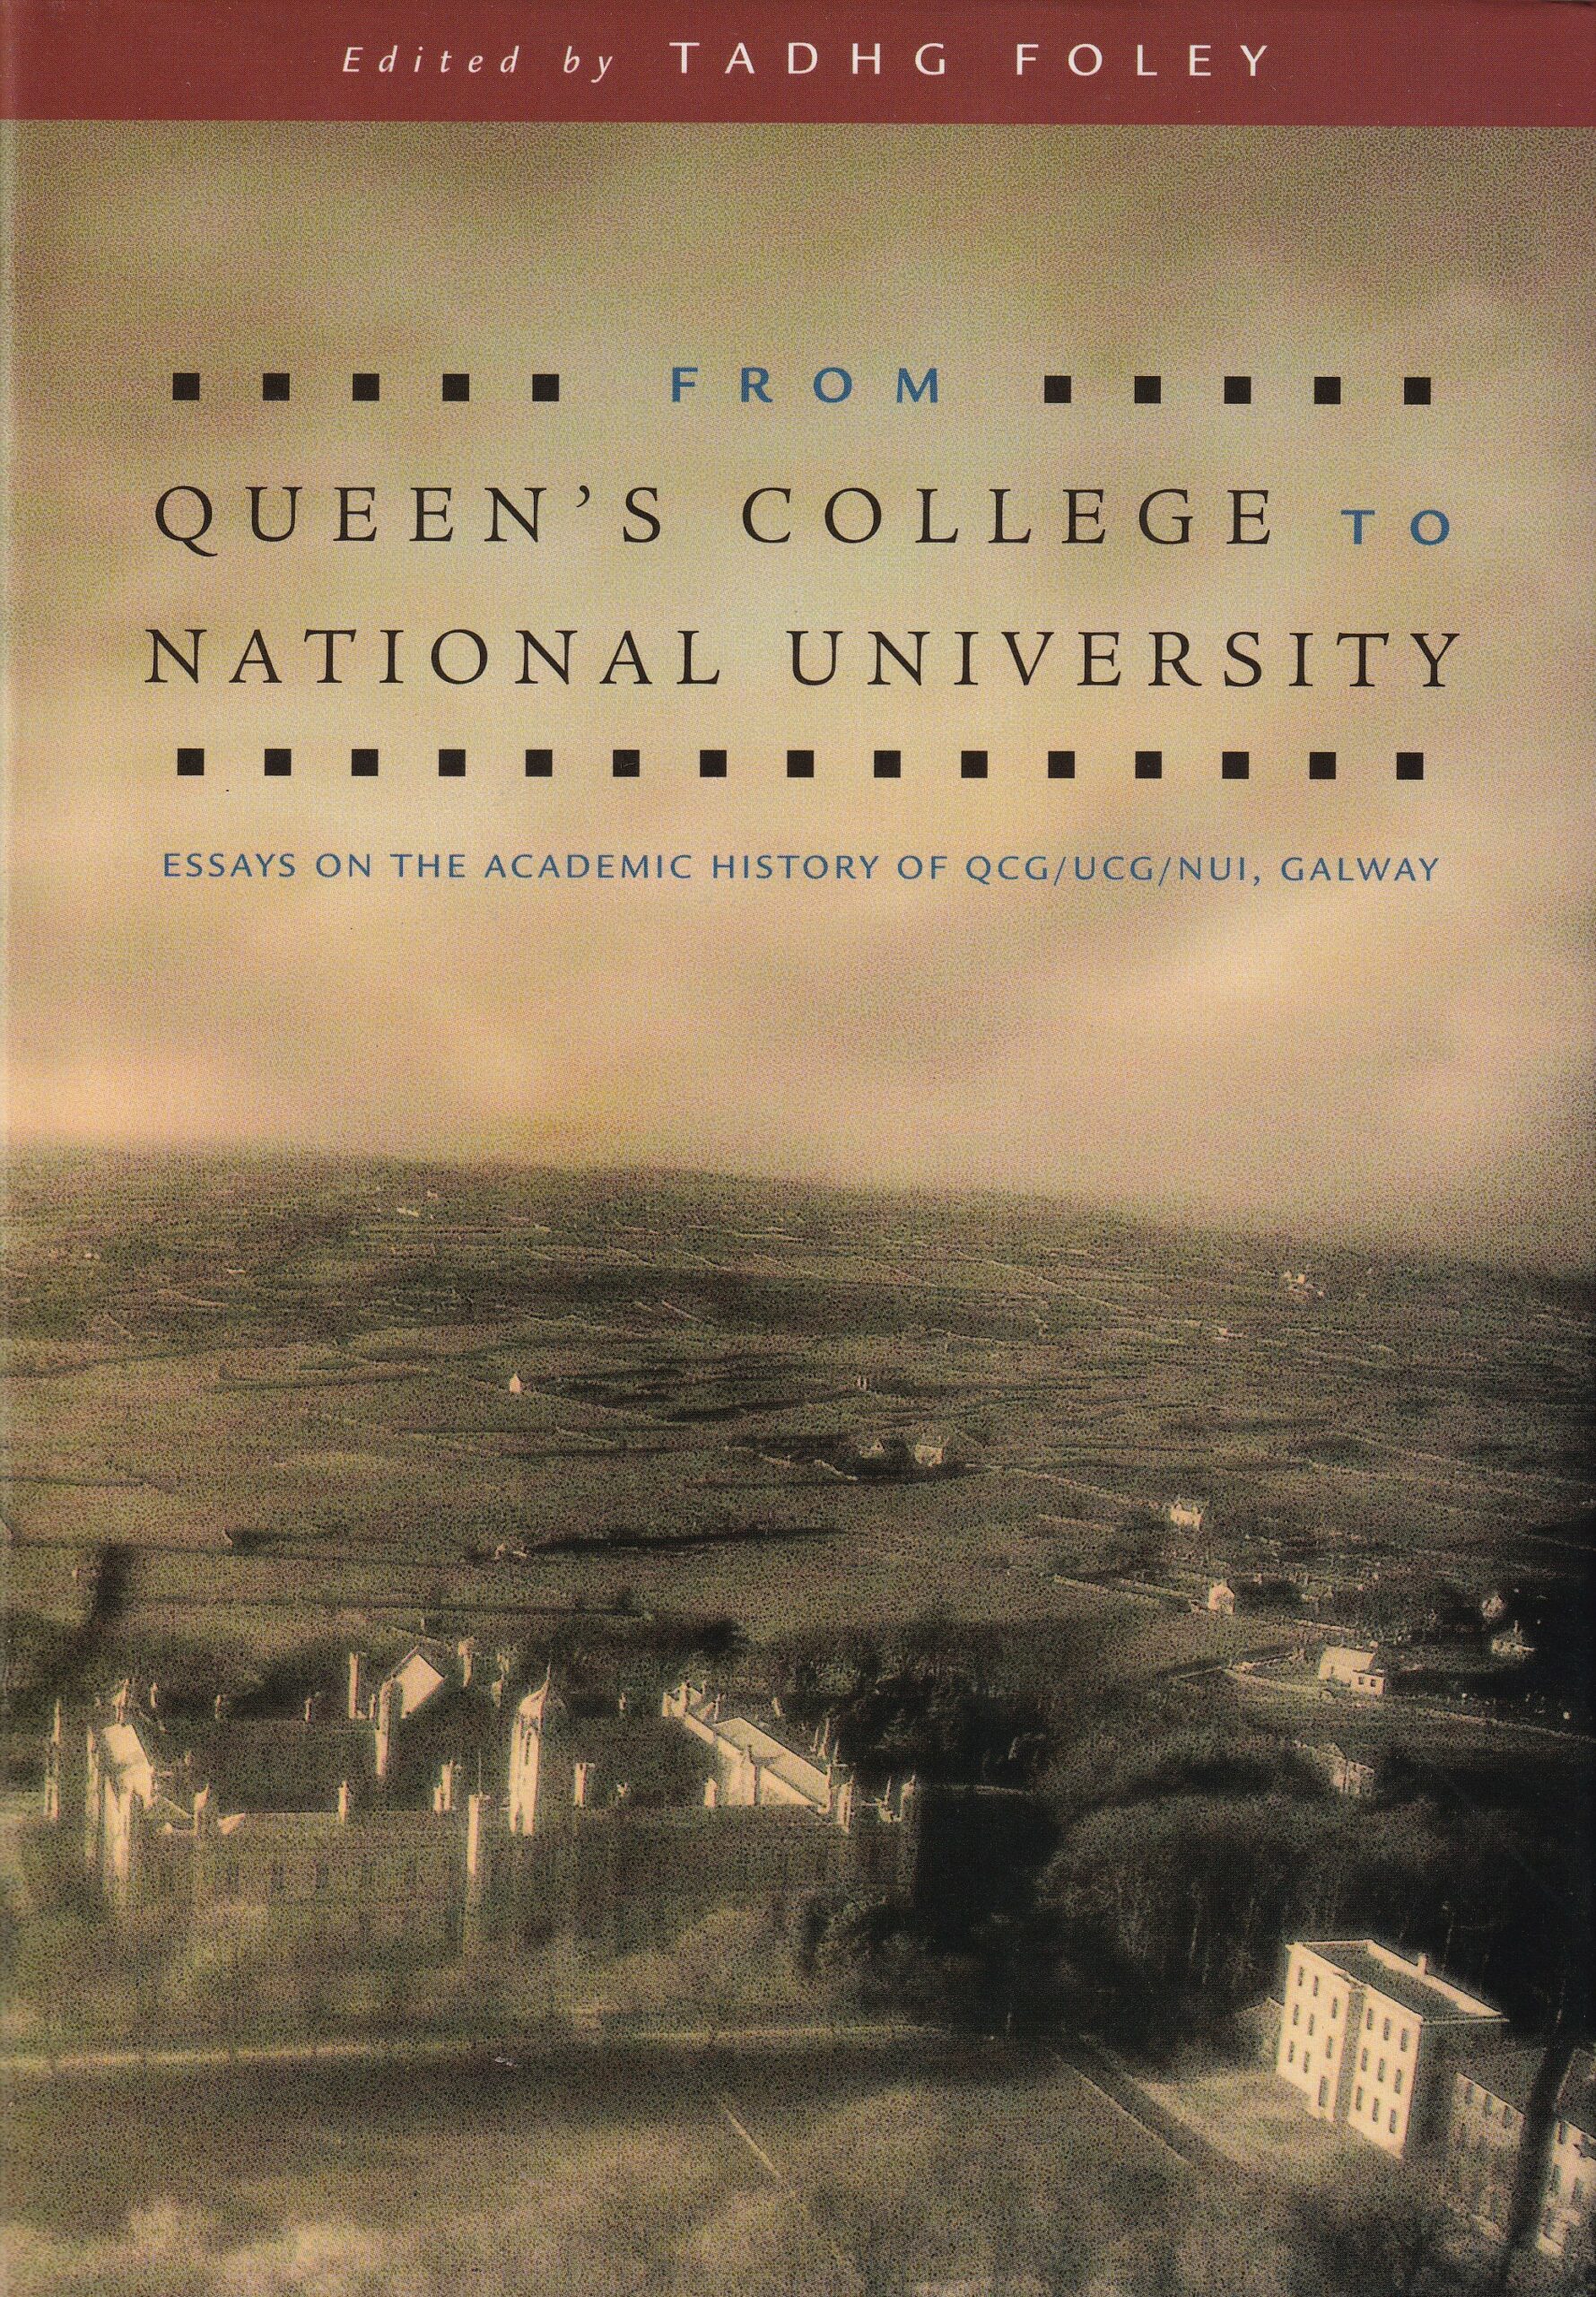 From Queen’s College to National University: Essays on the Academic History of QCG/UCG/NUI, Galway | Tadhg Foley | Charlie Byrne's